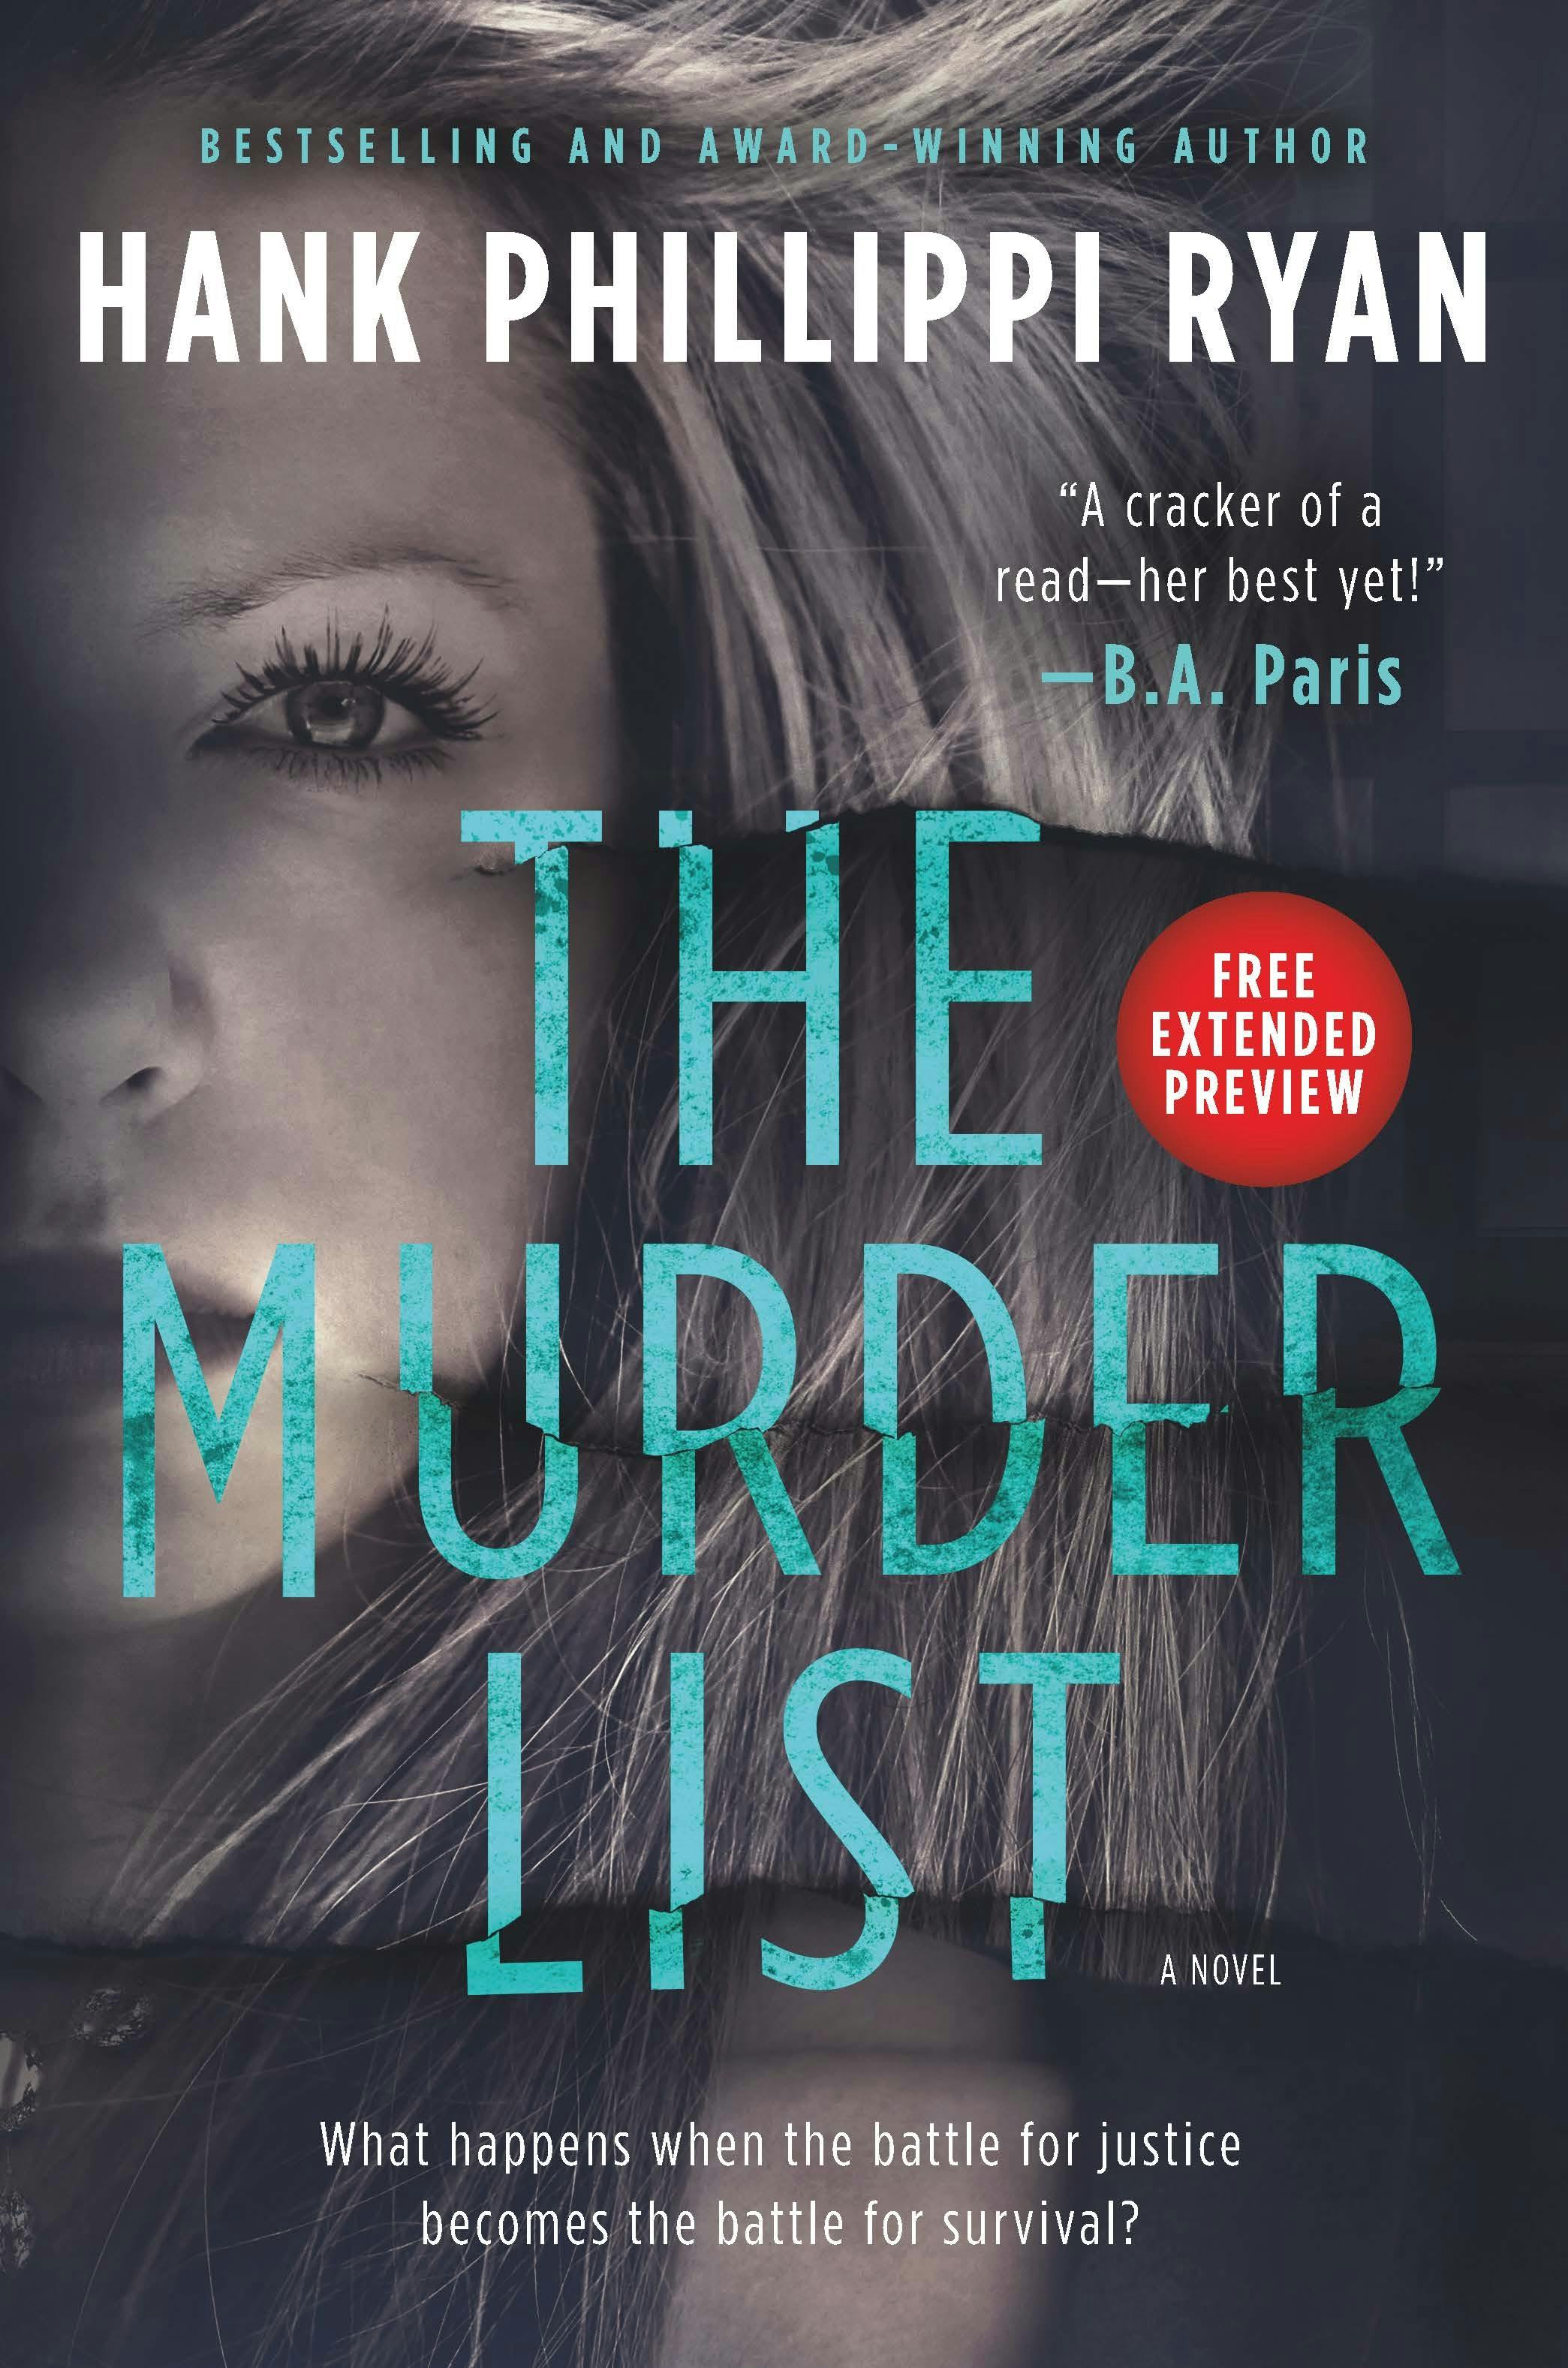 Cover for the book titled as: The Murder List Sneak Peek